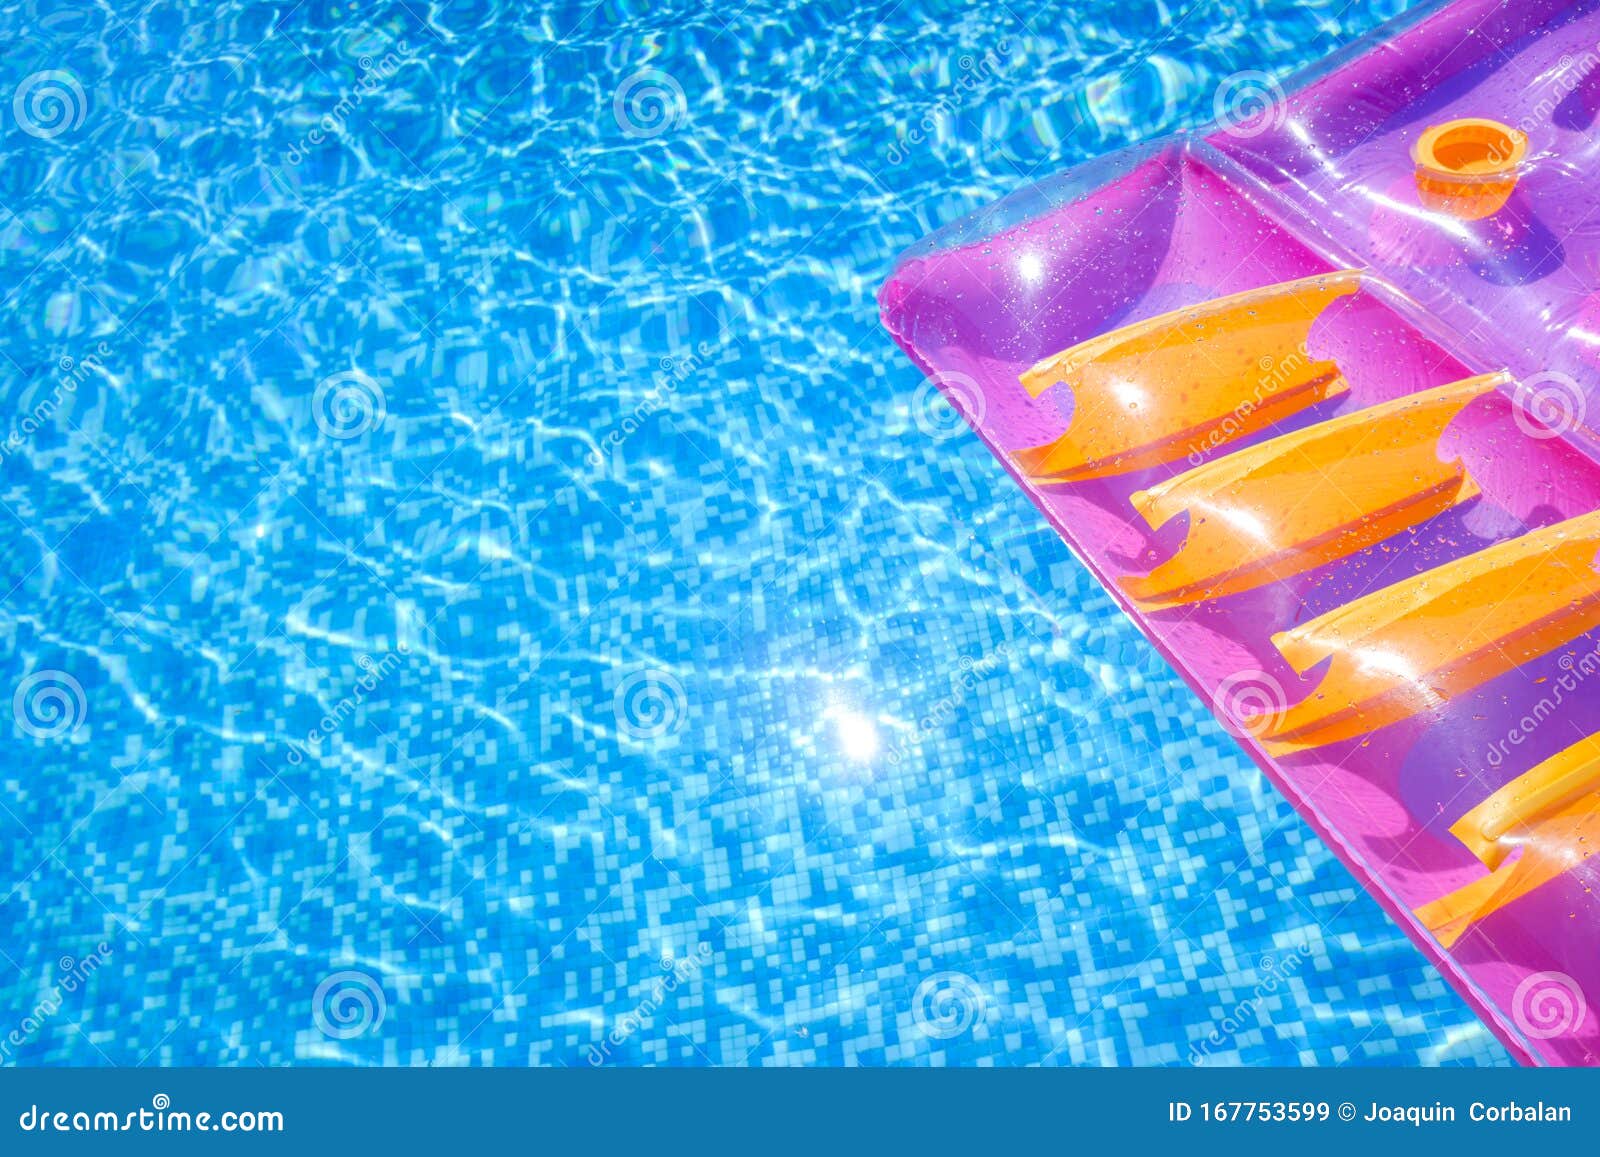 Transparent Water from a Pool, Background with Summer Colored Floats ...